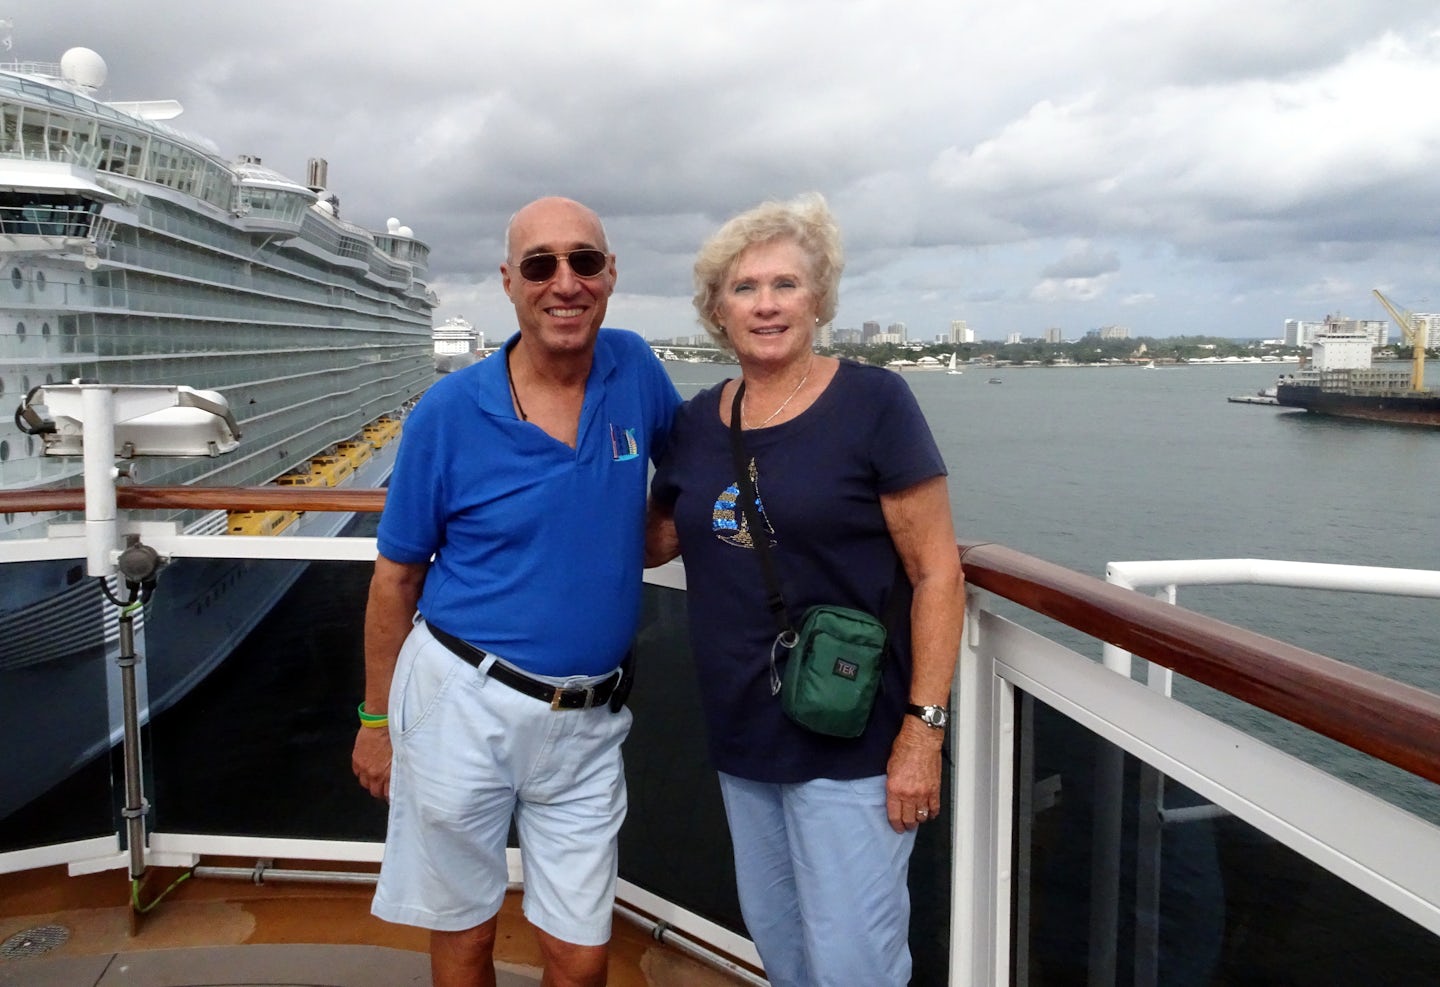 We are out on the deck aboard the ms. Koningsdam in Fort Lauderdale